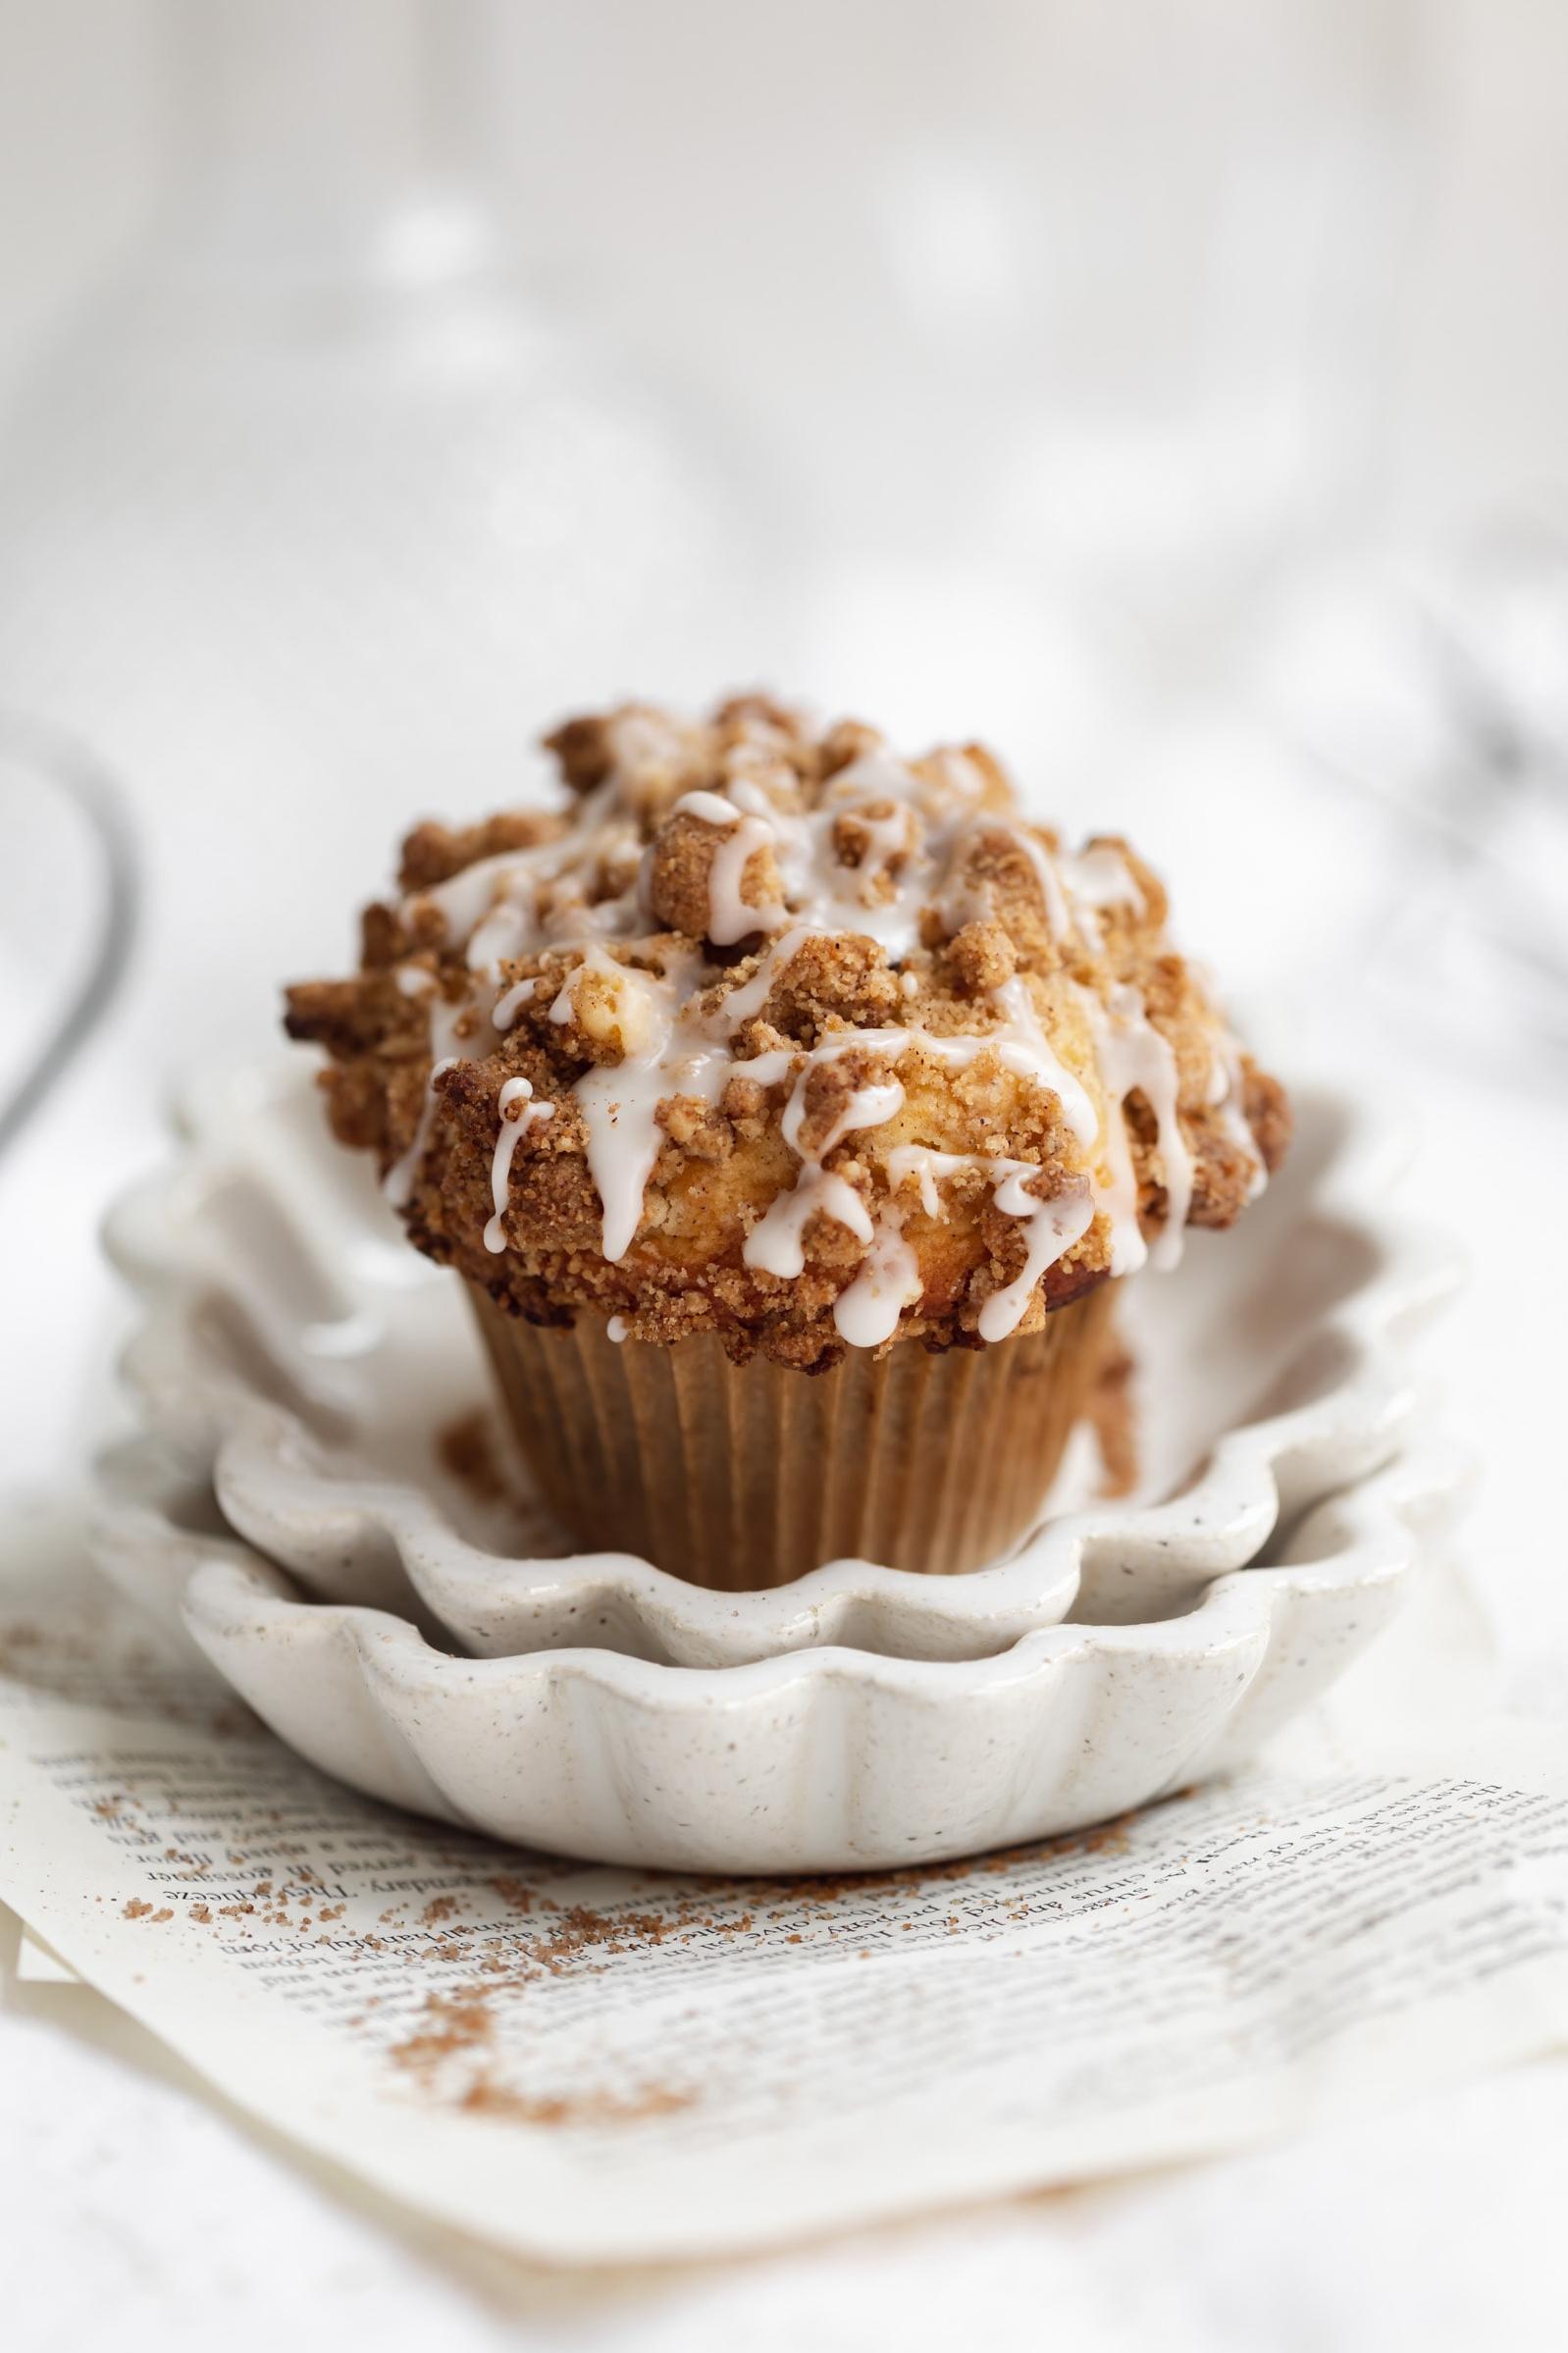  One bite of these muffins and you'll be in coffee cake heaven.